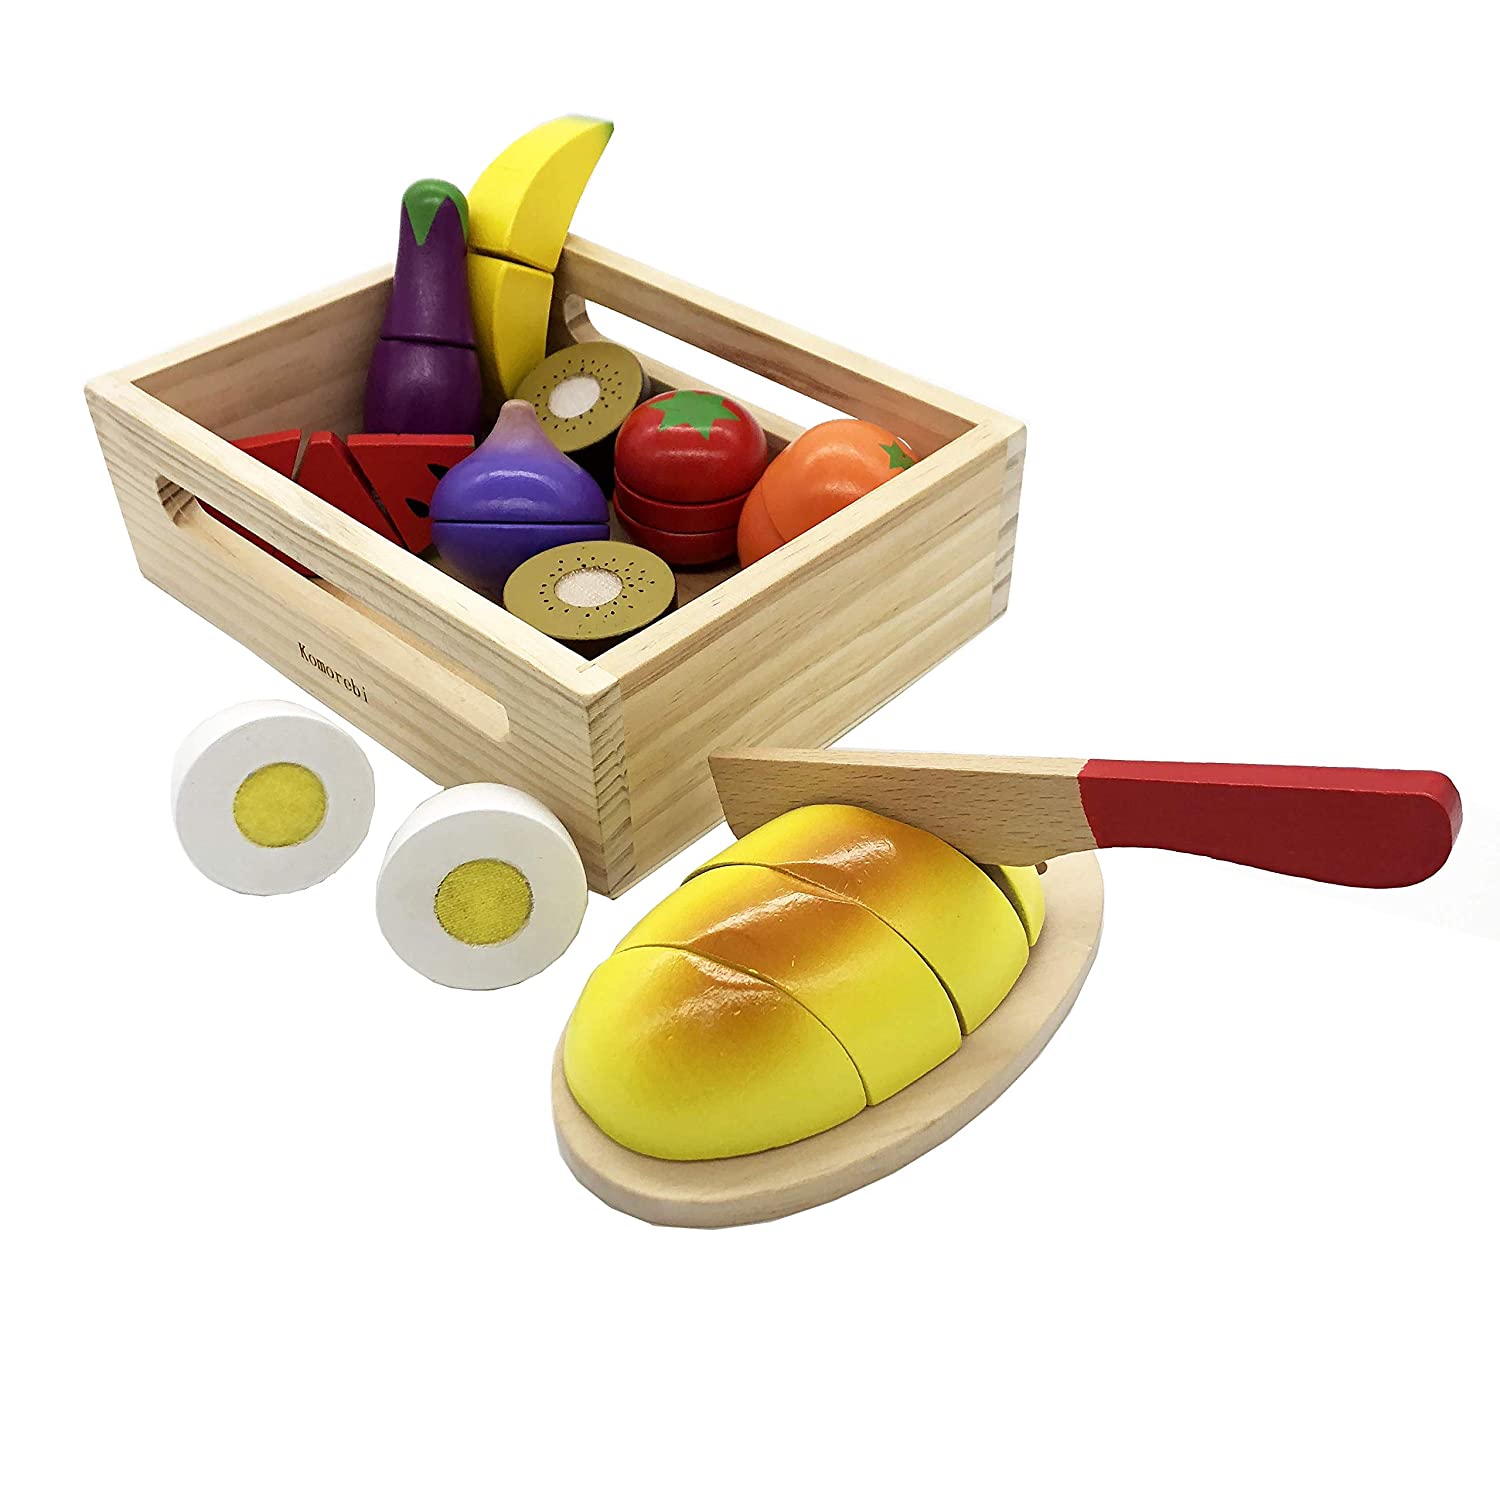 KOMOREBI Play & Cut Food Wooden Preschool Toys Pretend Play Kitchen Set Early Educational Development Toys for 2,3,4,5,6 Year Old Kids Learning Color Fruit and Vegetable Toy Gift for Toddlers